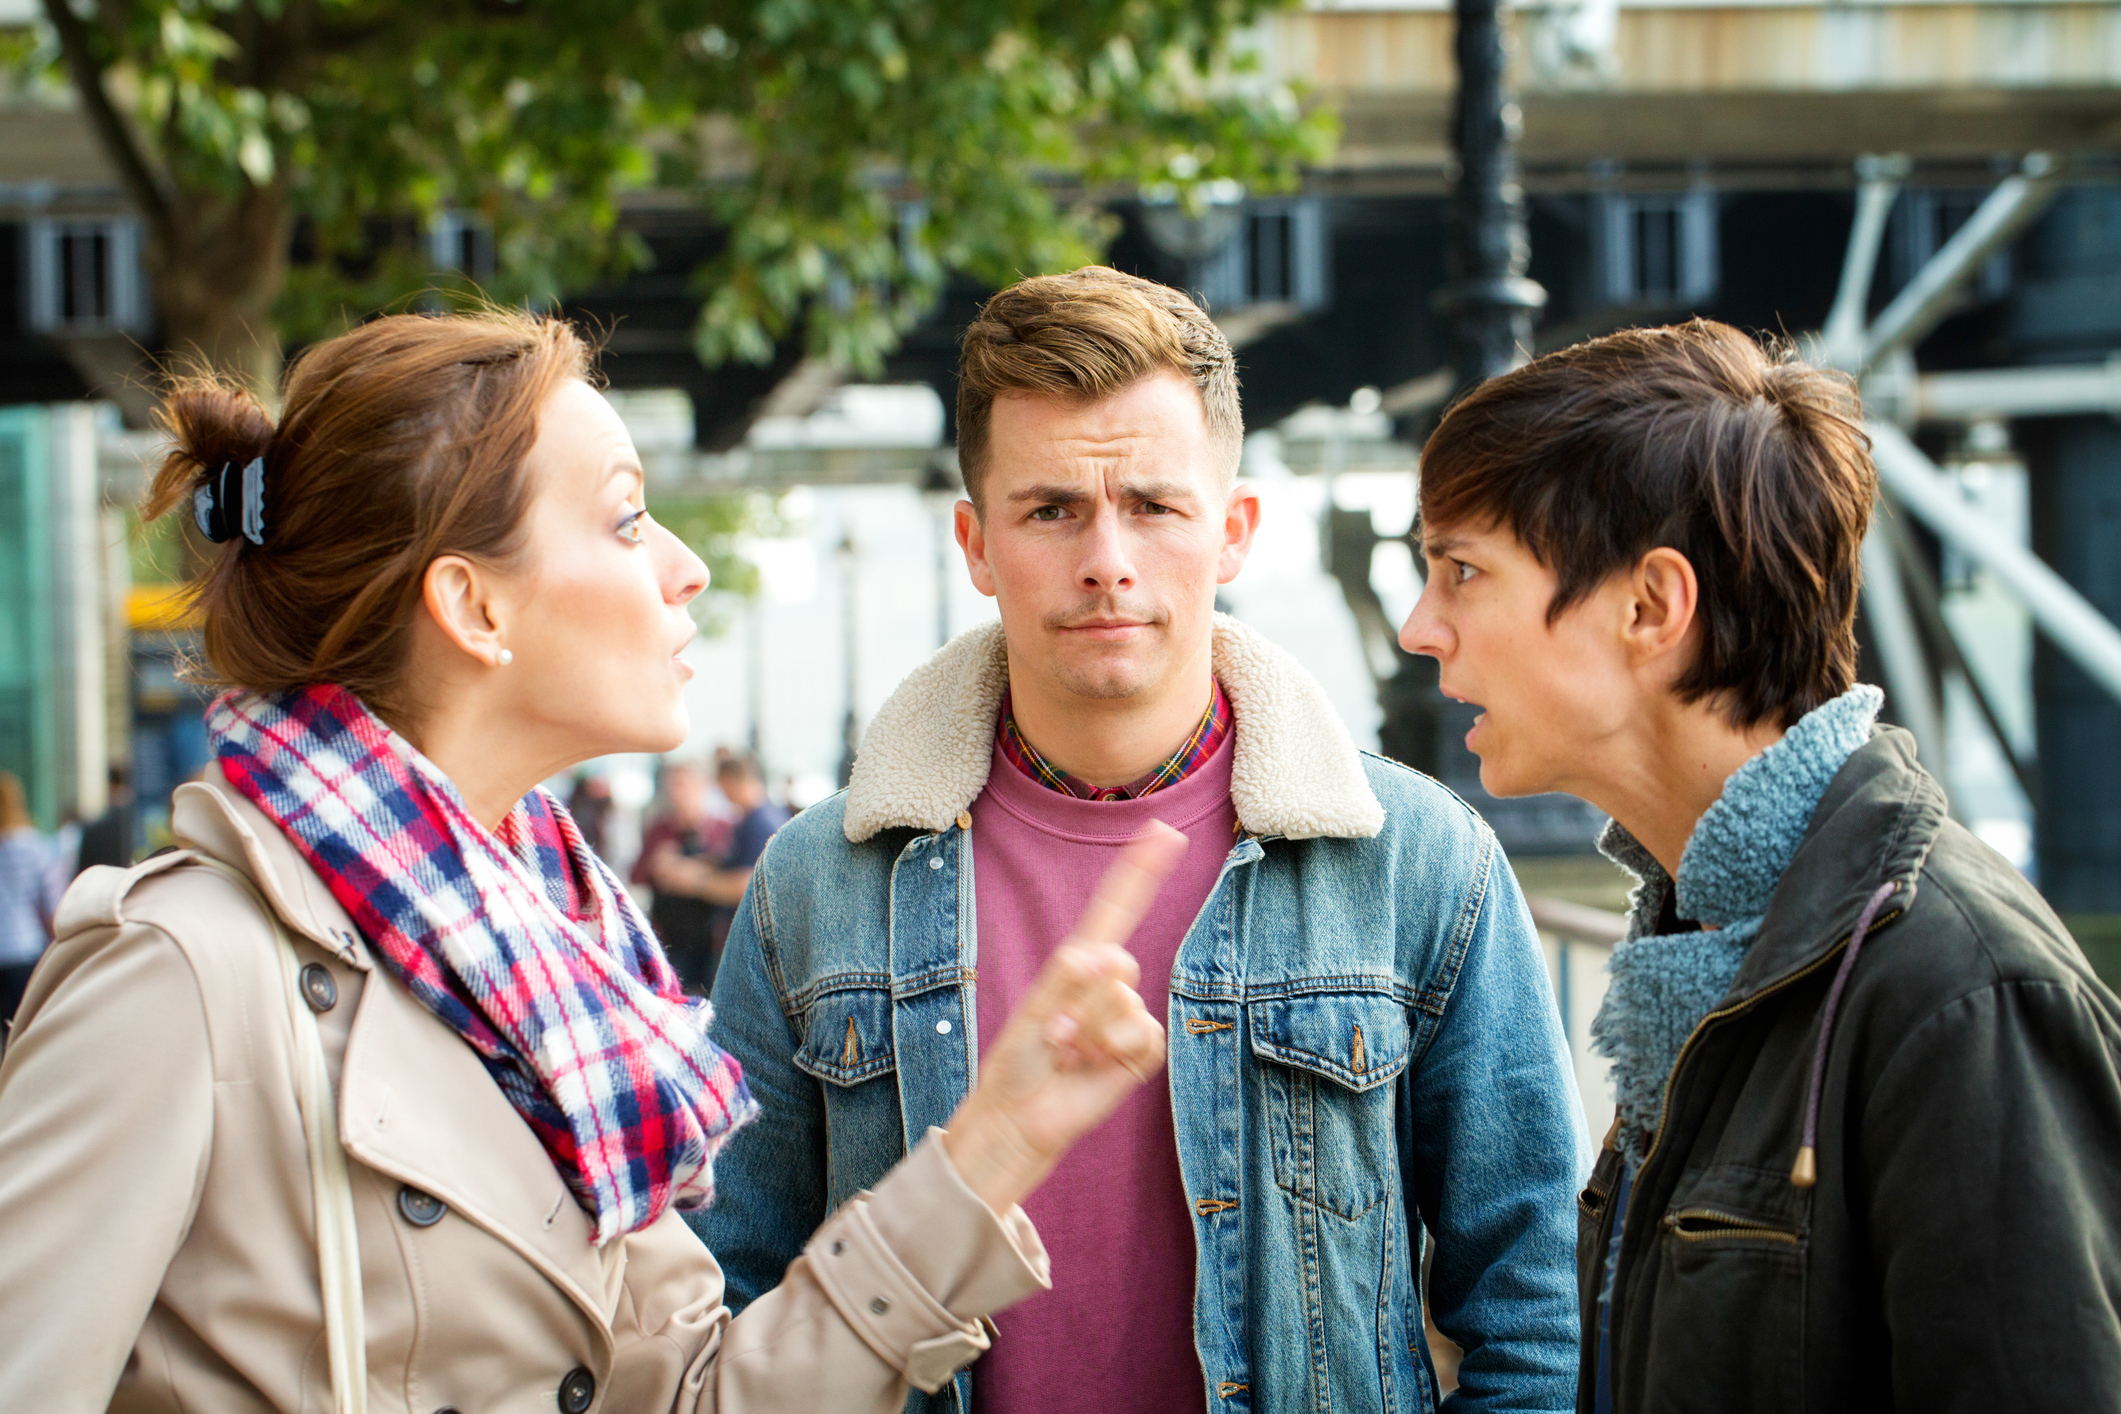 Three people appear engaged in a serious conversation, with one person seemingly uncomfortable